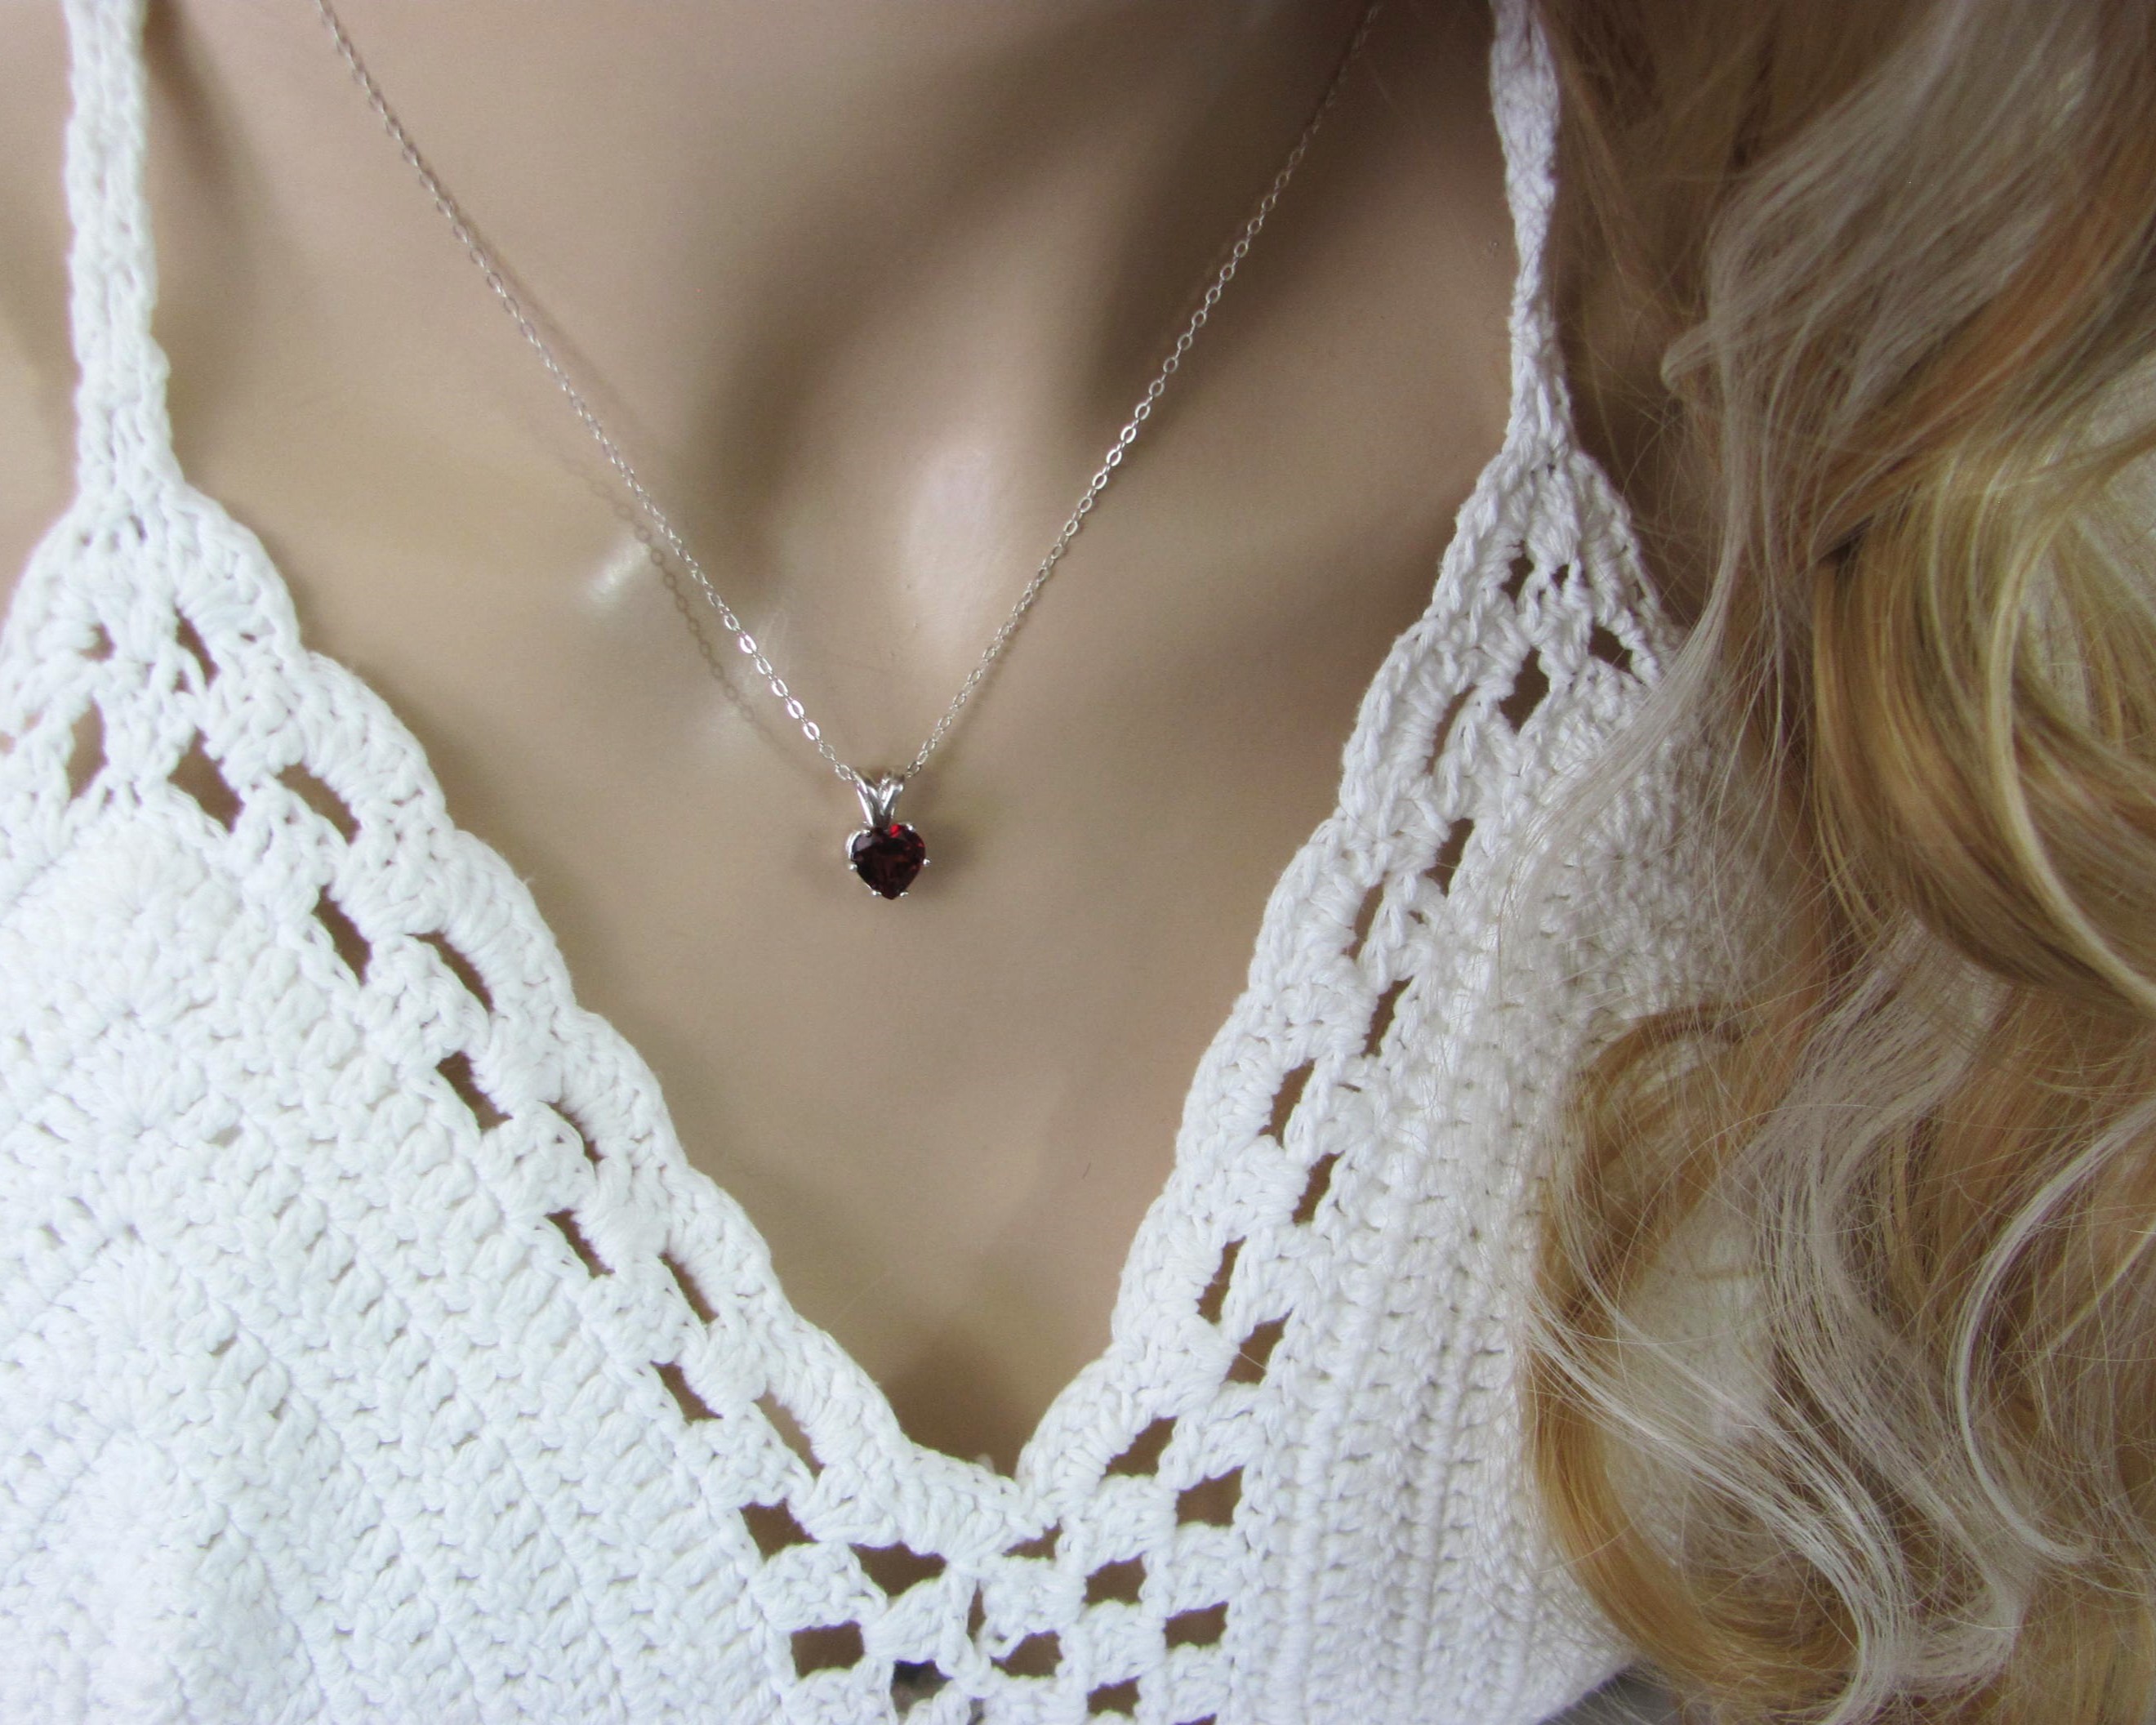 Garnet Heart Necklace in Sterling Silver, Valentine's Day Gift